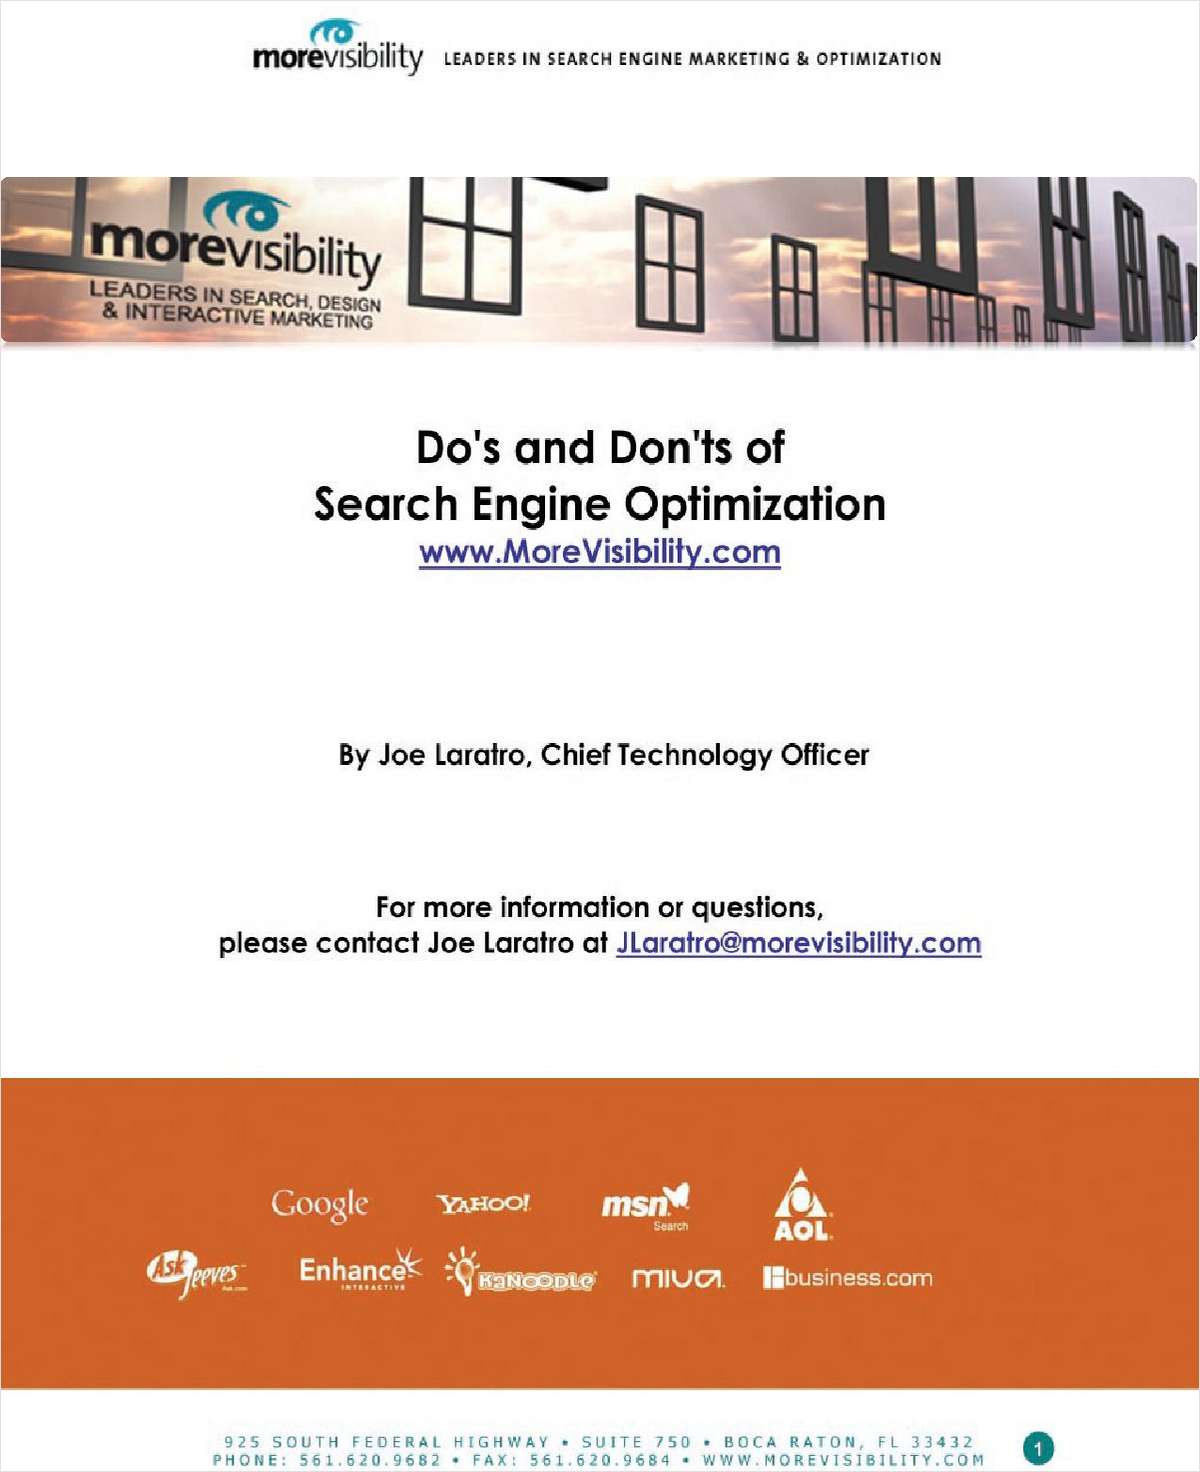 Do's and Don'ts of Search Engine Optimization